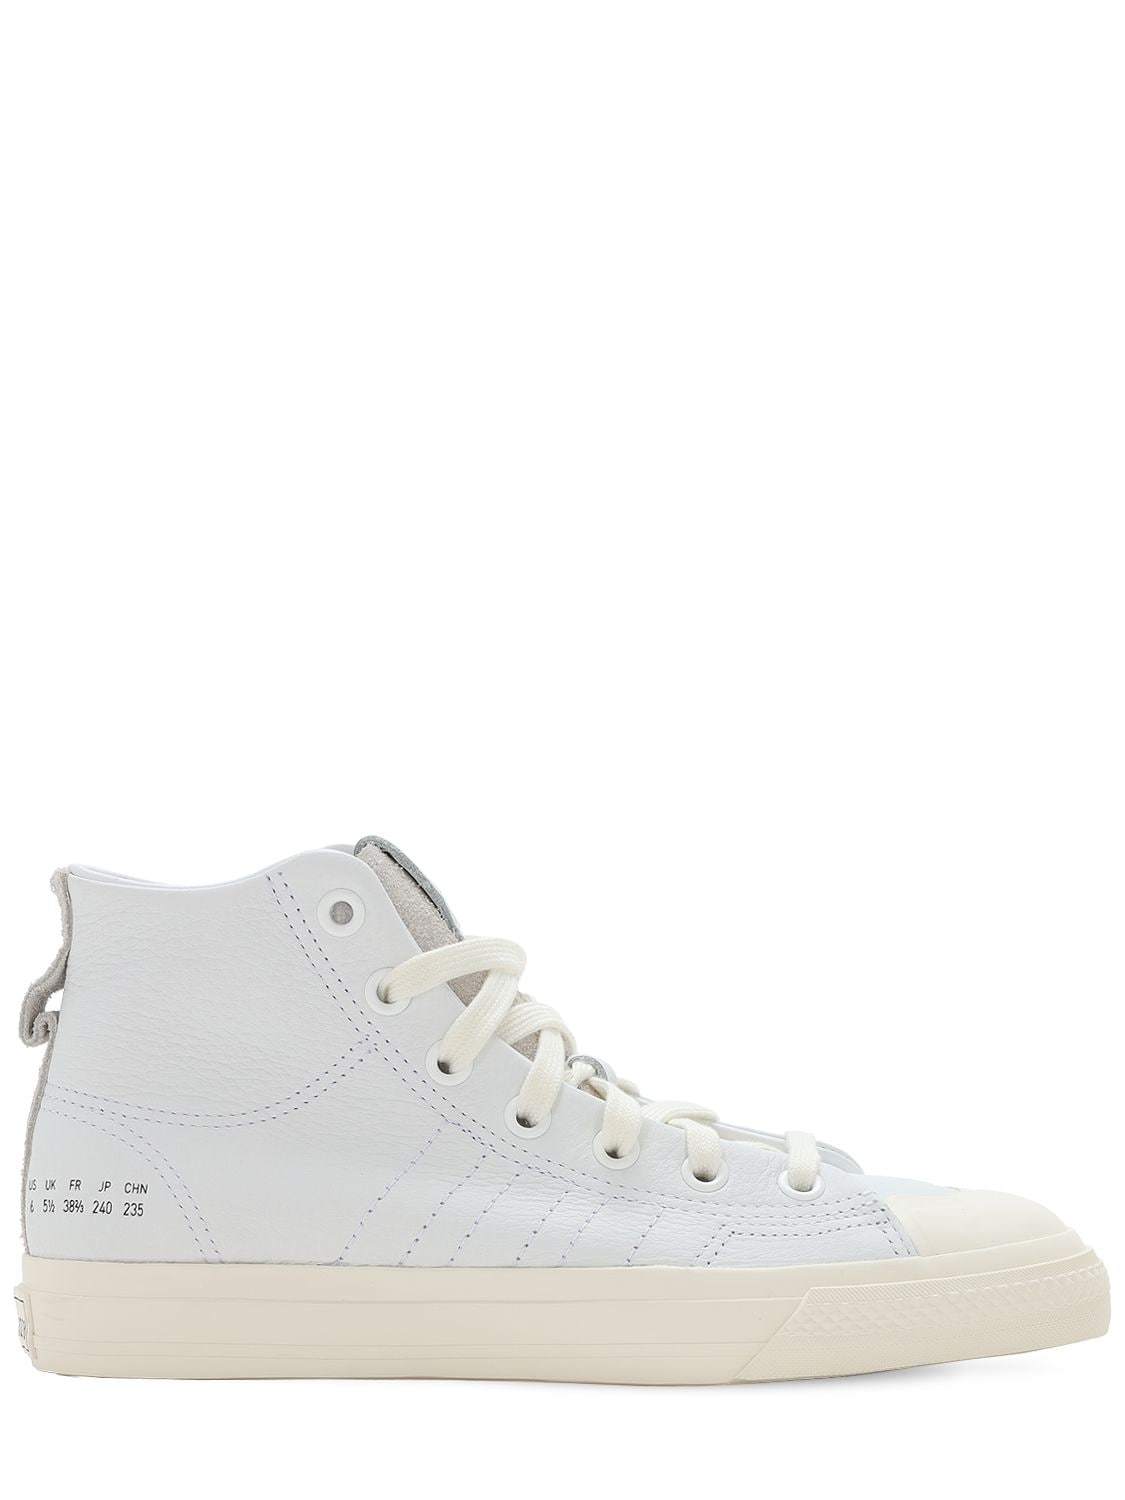 Adidas Originals Leather High Top Trainers In White | ModeSens